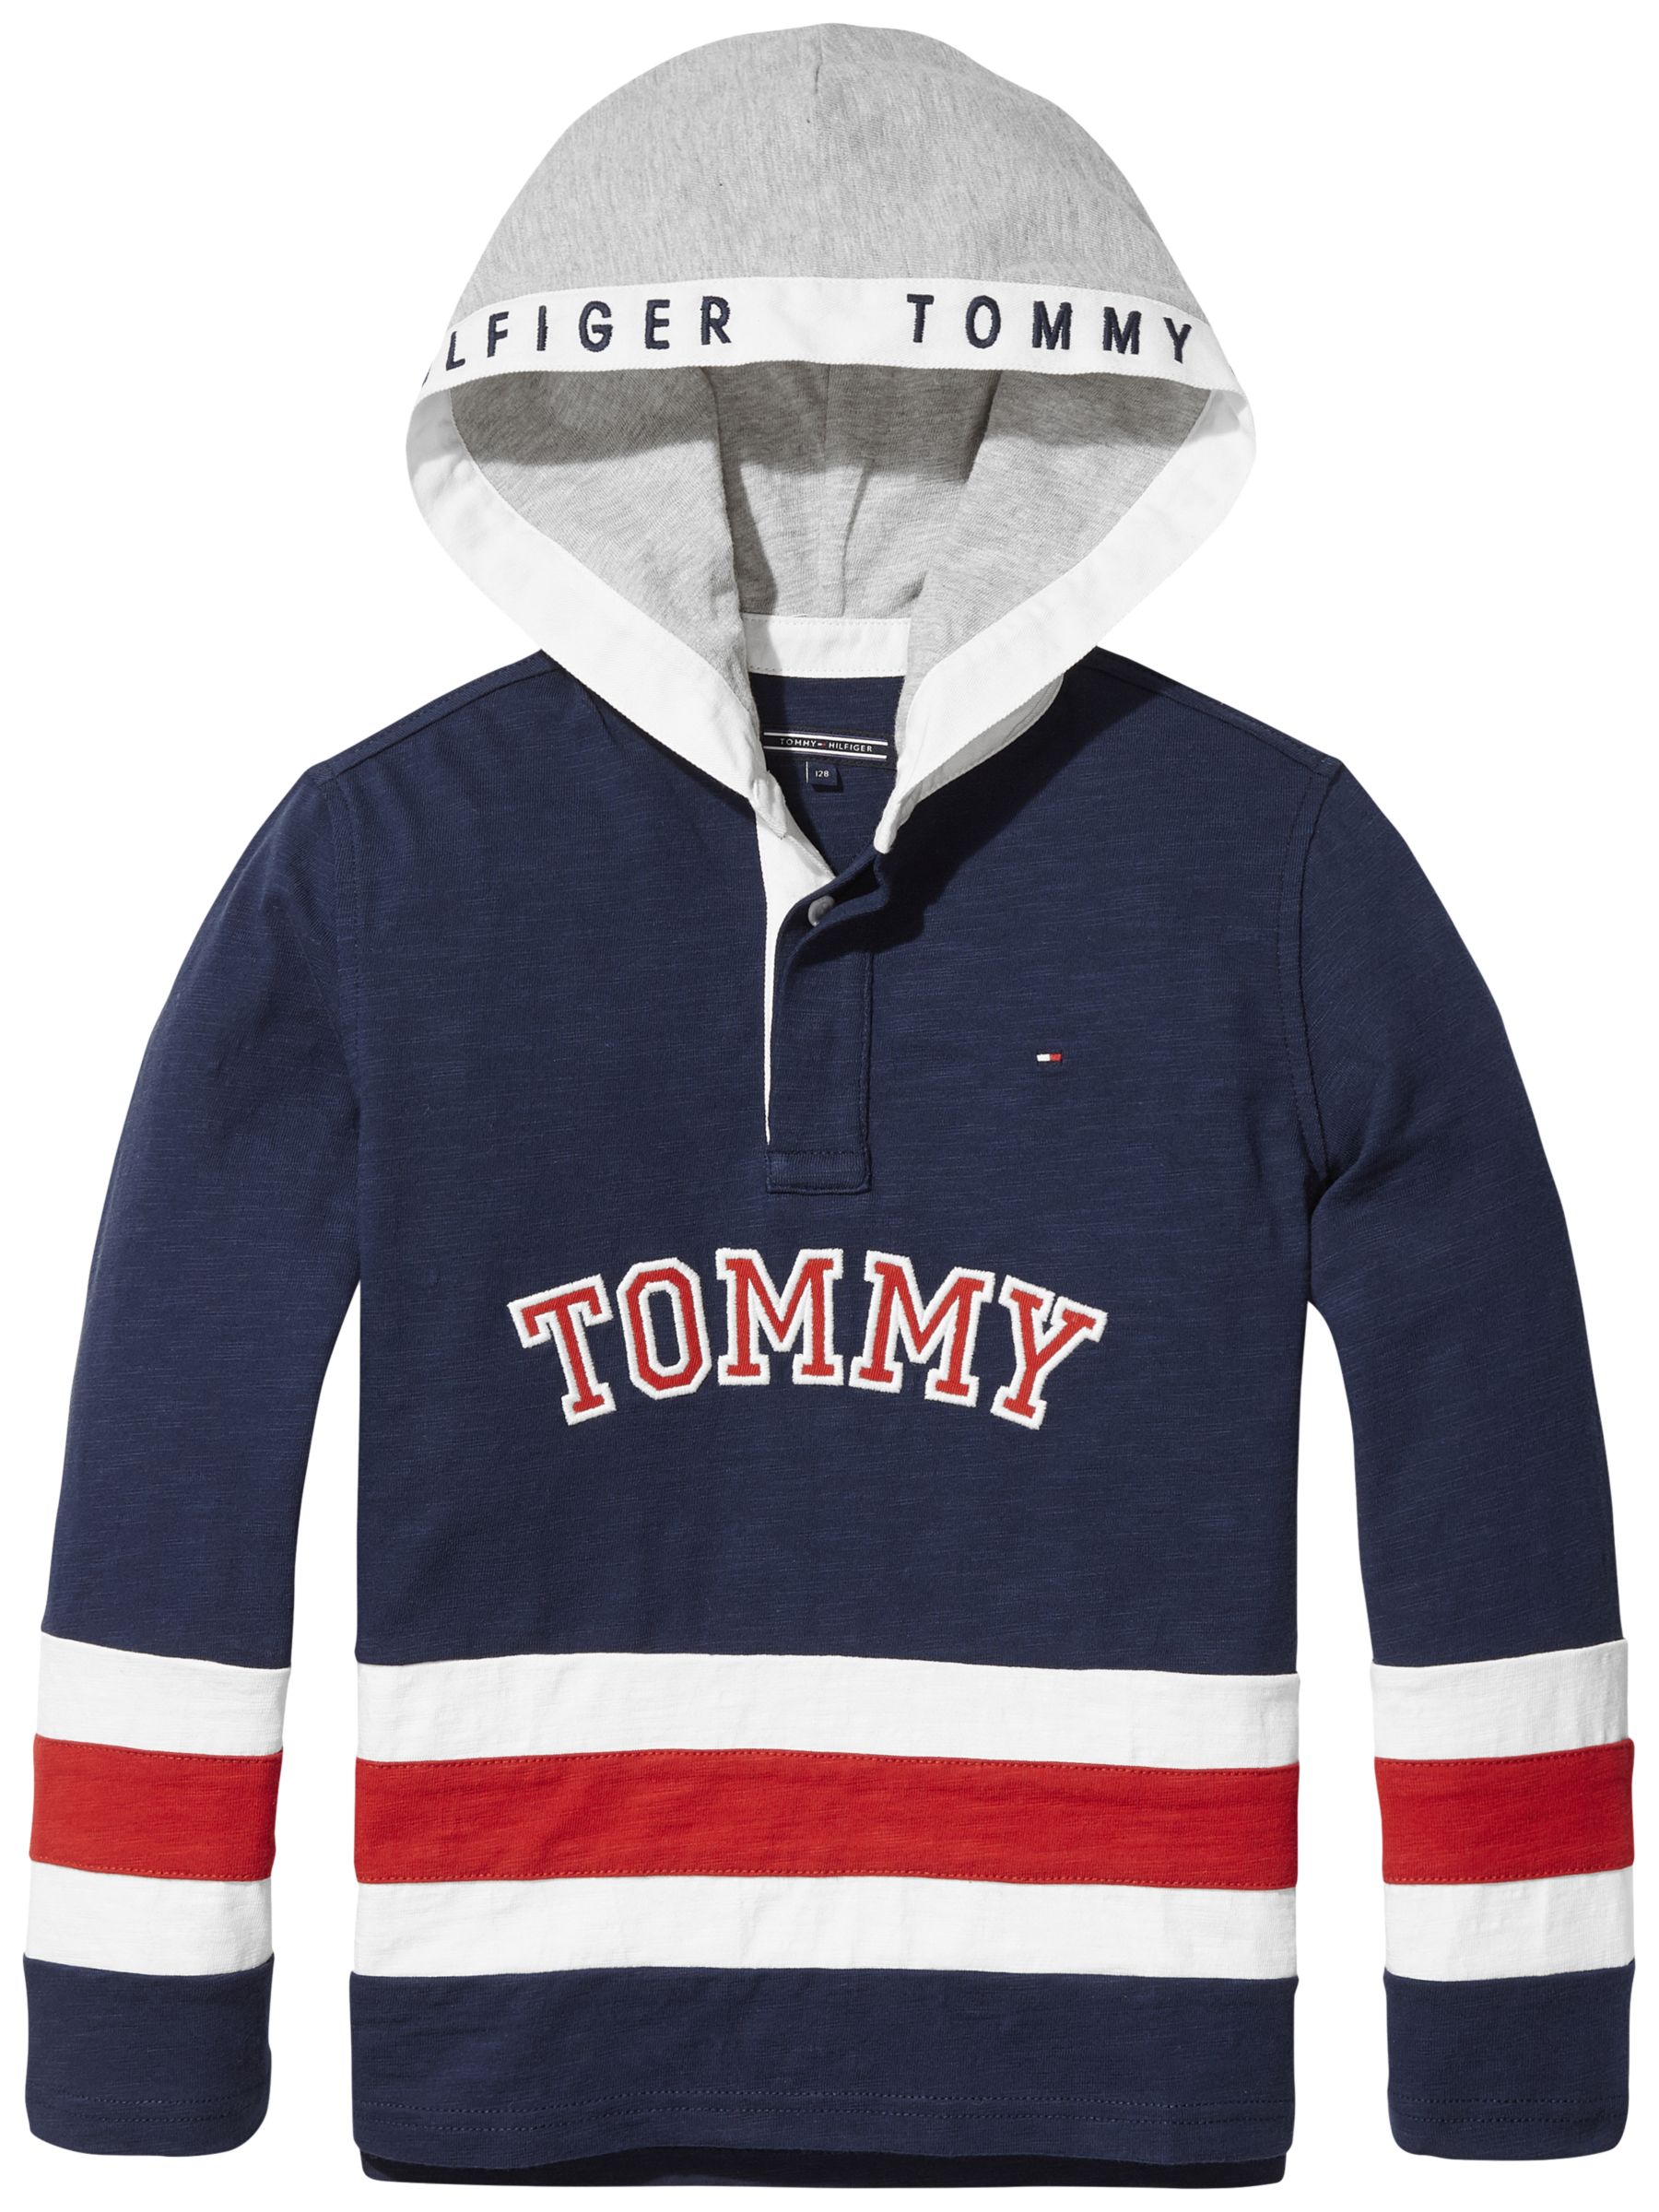 Tommy Hilfiger Boys' Hooded Rugby Top, Blue at John Lewis & Partners